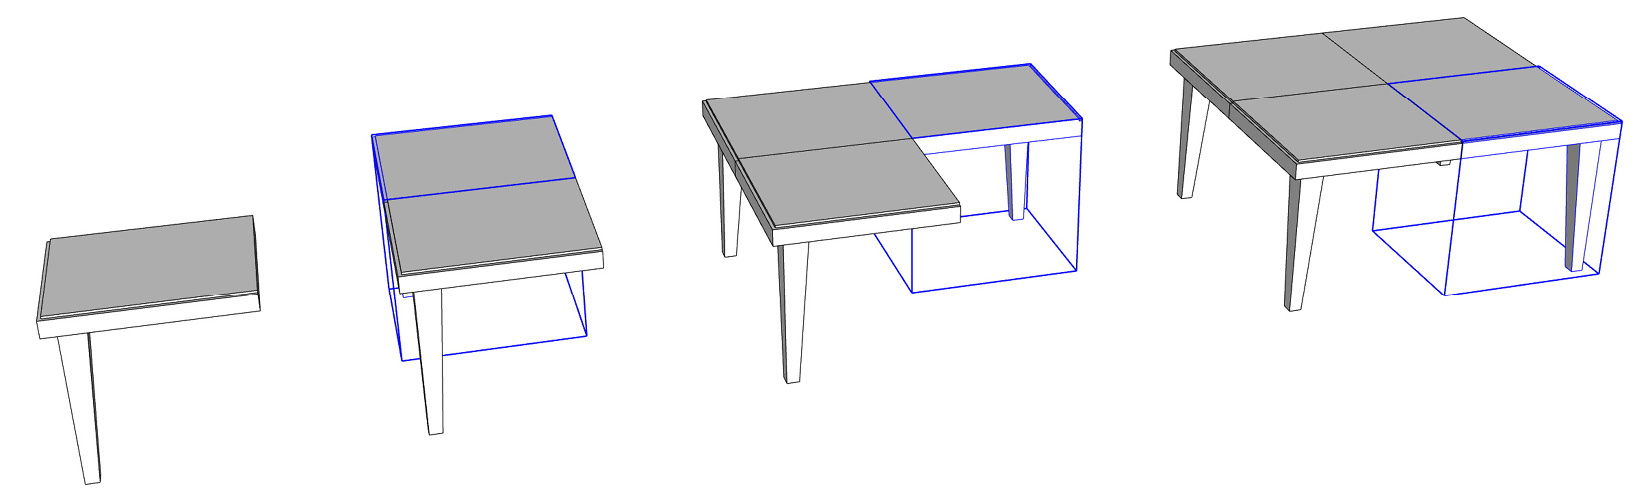 Figure 13.15 – A quarter of this table was modeled as a component and then mirrored three times
